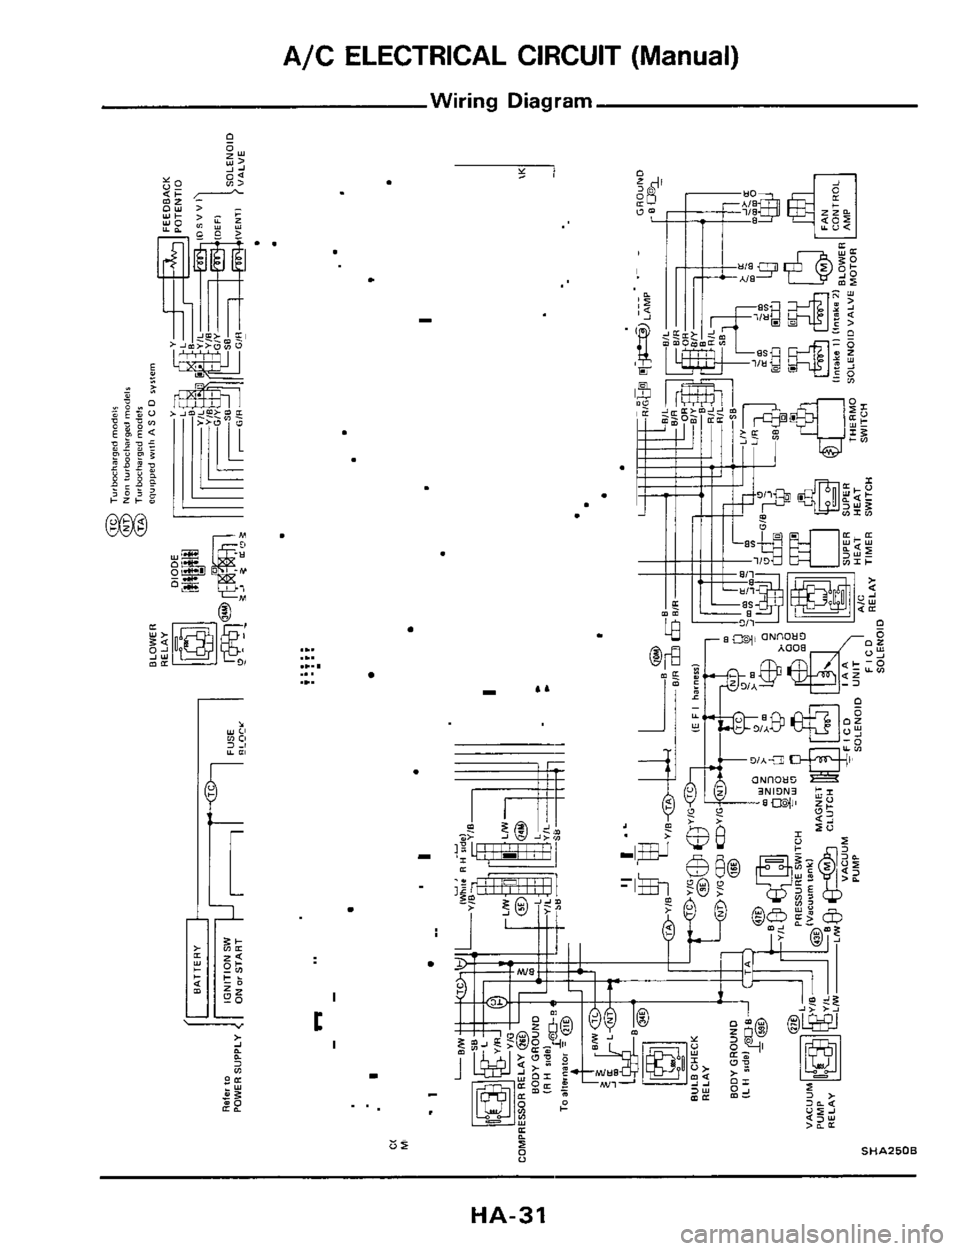 NISSAN 300ZX 1984 Z31 Heather And Air Conditioner Workshop Manual A/C ELECTRICAL  CIRCUIT (Manual) 
Wiring Diagram 
. 
. 
... ... .... .. . ... 
. 
. 
. 
. 
I 
t 
. 
HA-31  